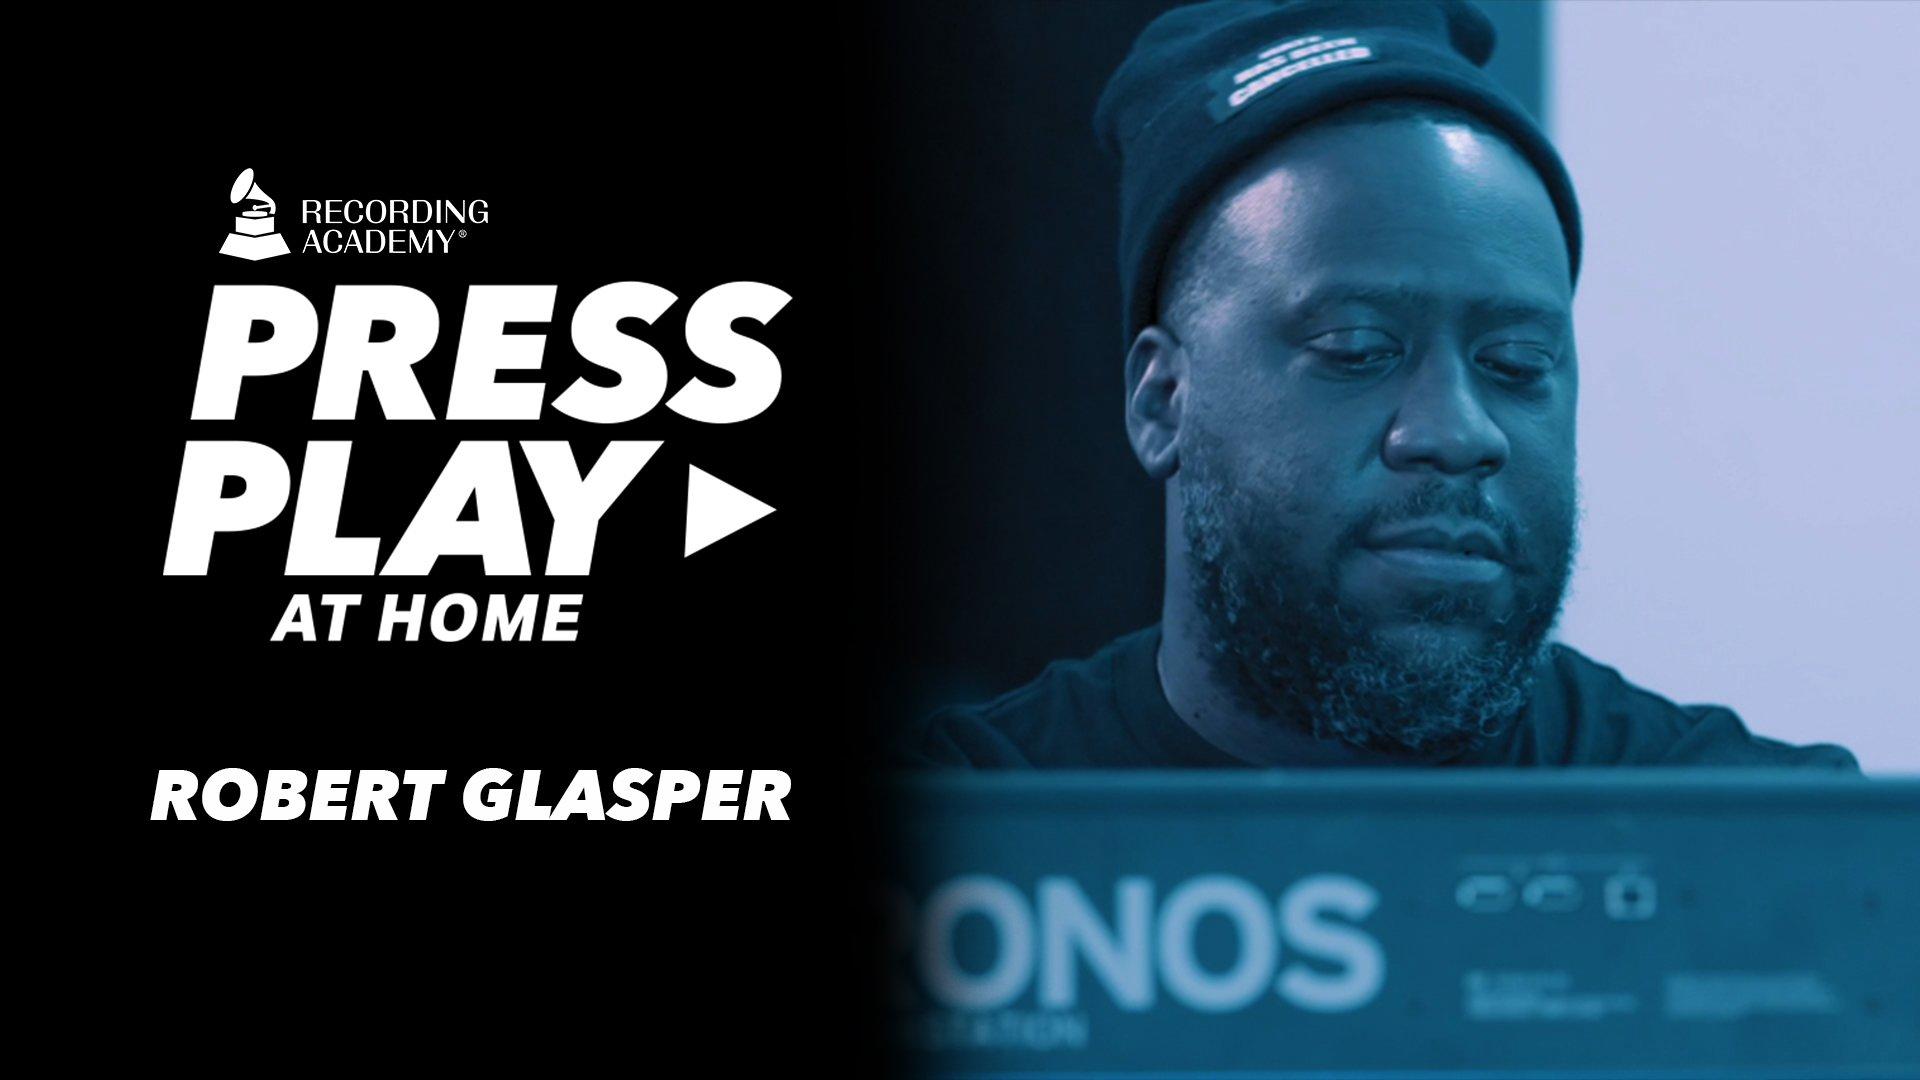 Robert Glasper Performs "This Changes Everything"